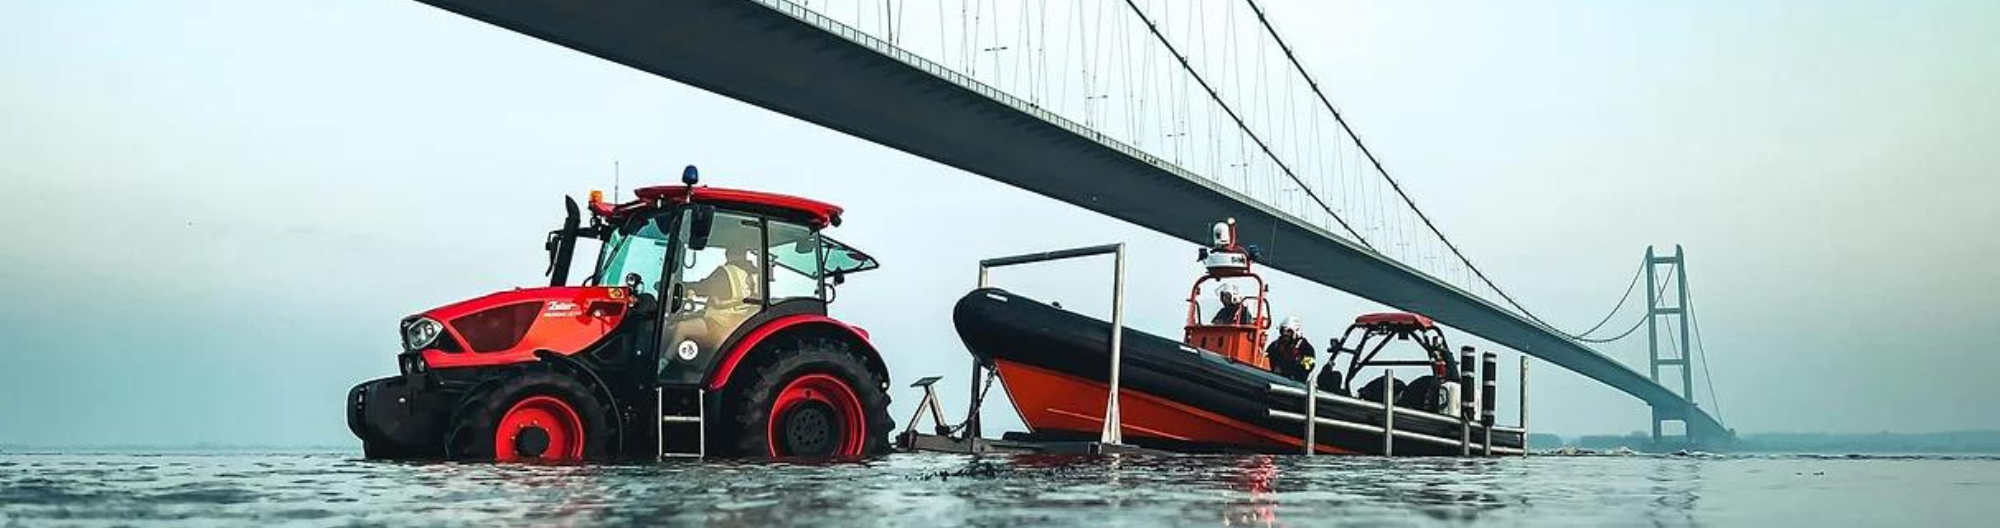 Humber Rescue tractor and trailer pictured under the Humber Bridge